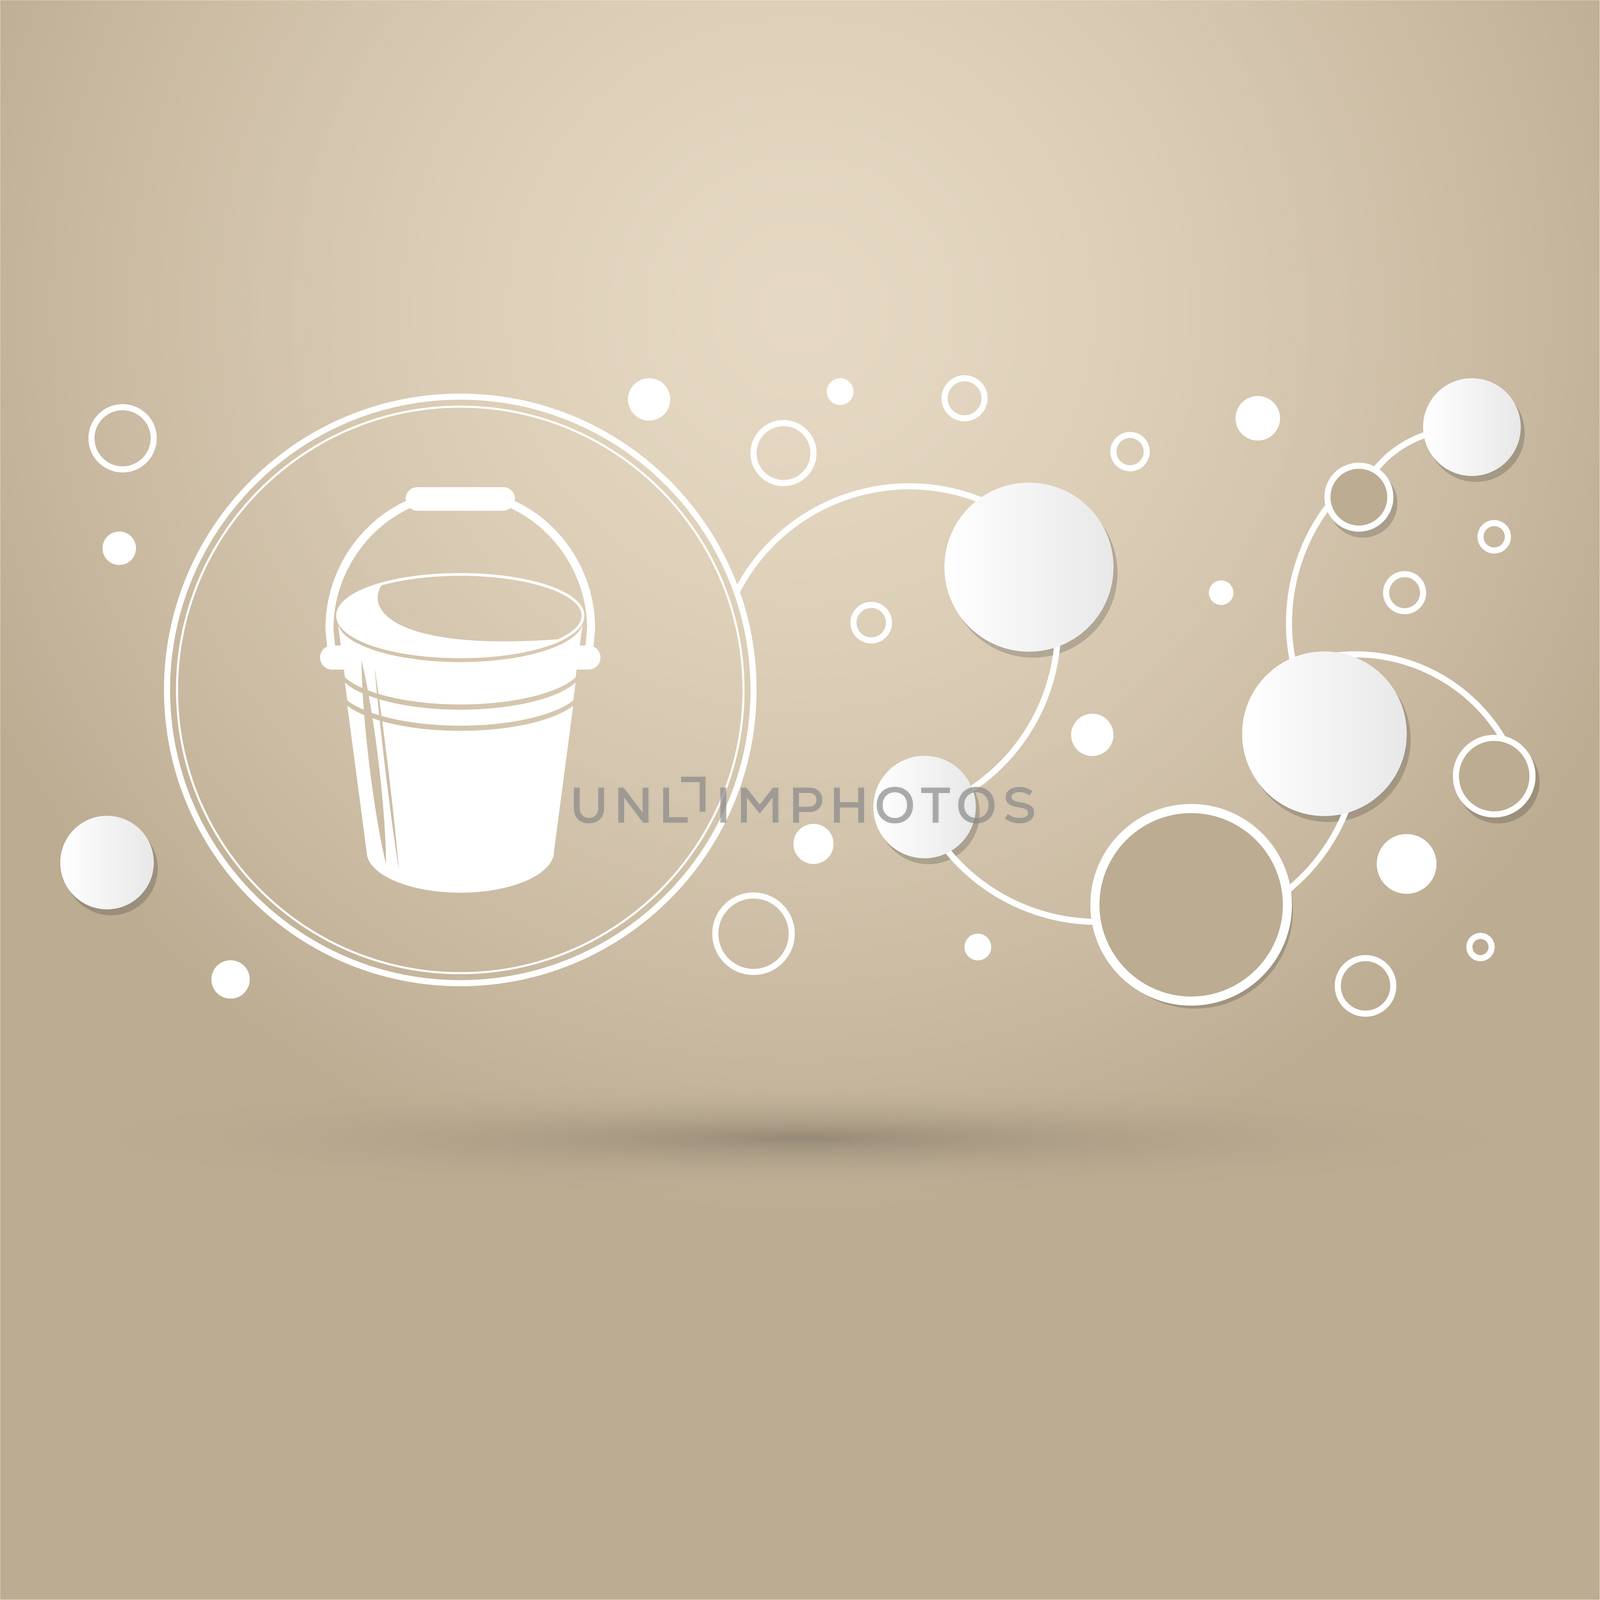 Bucket icon on a brown background with elegant style and modern design infographic. illustration